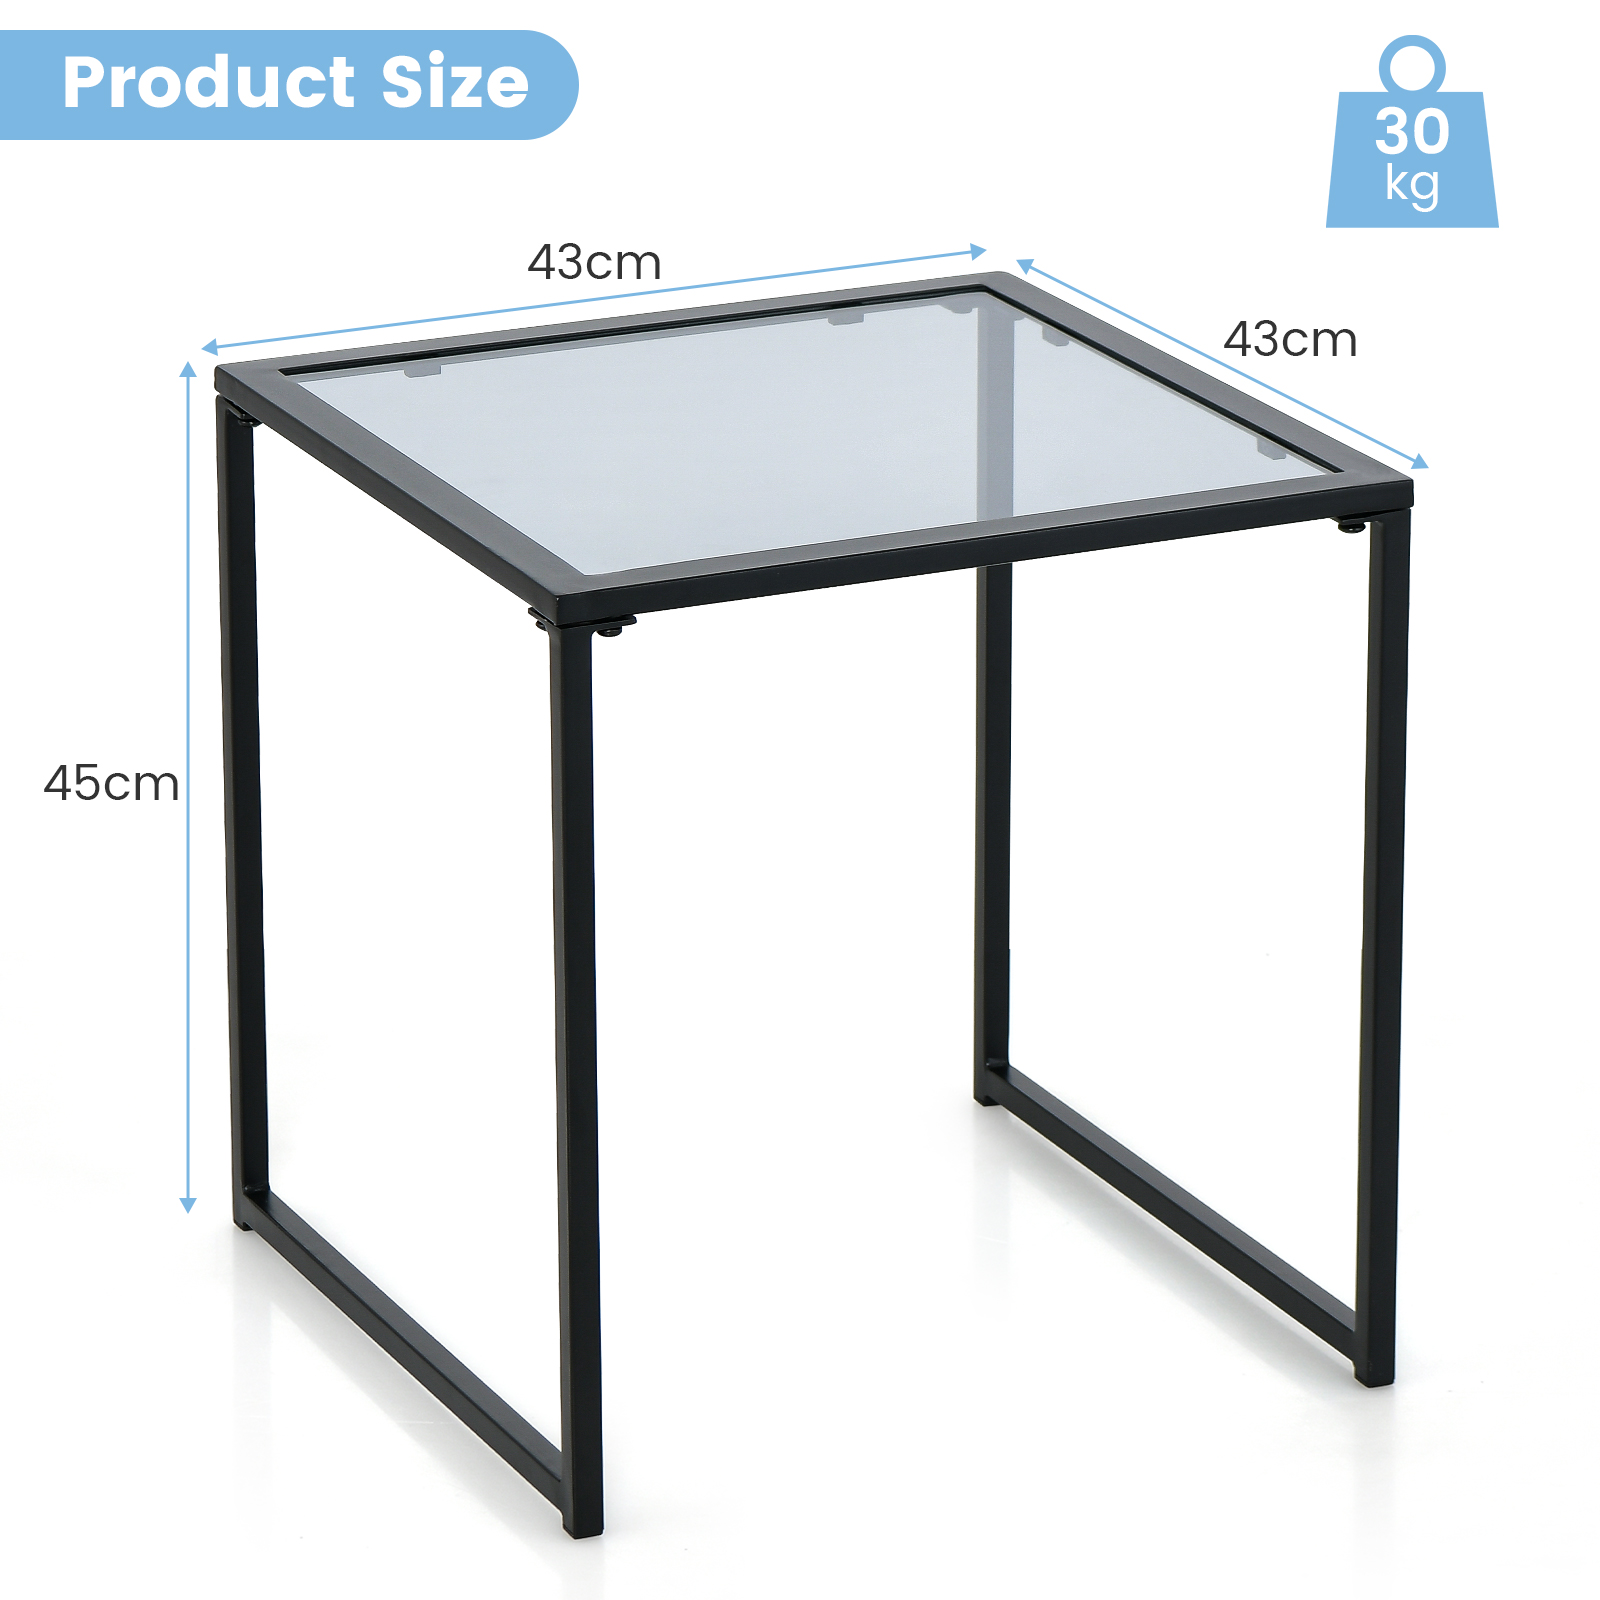 43cm_Tempered_Glass_Top_Side_Table_with_Metal_Frame_Size-4.jpg